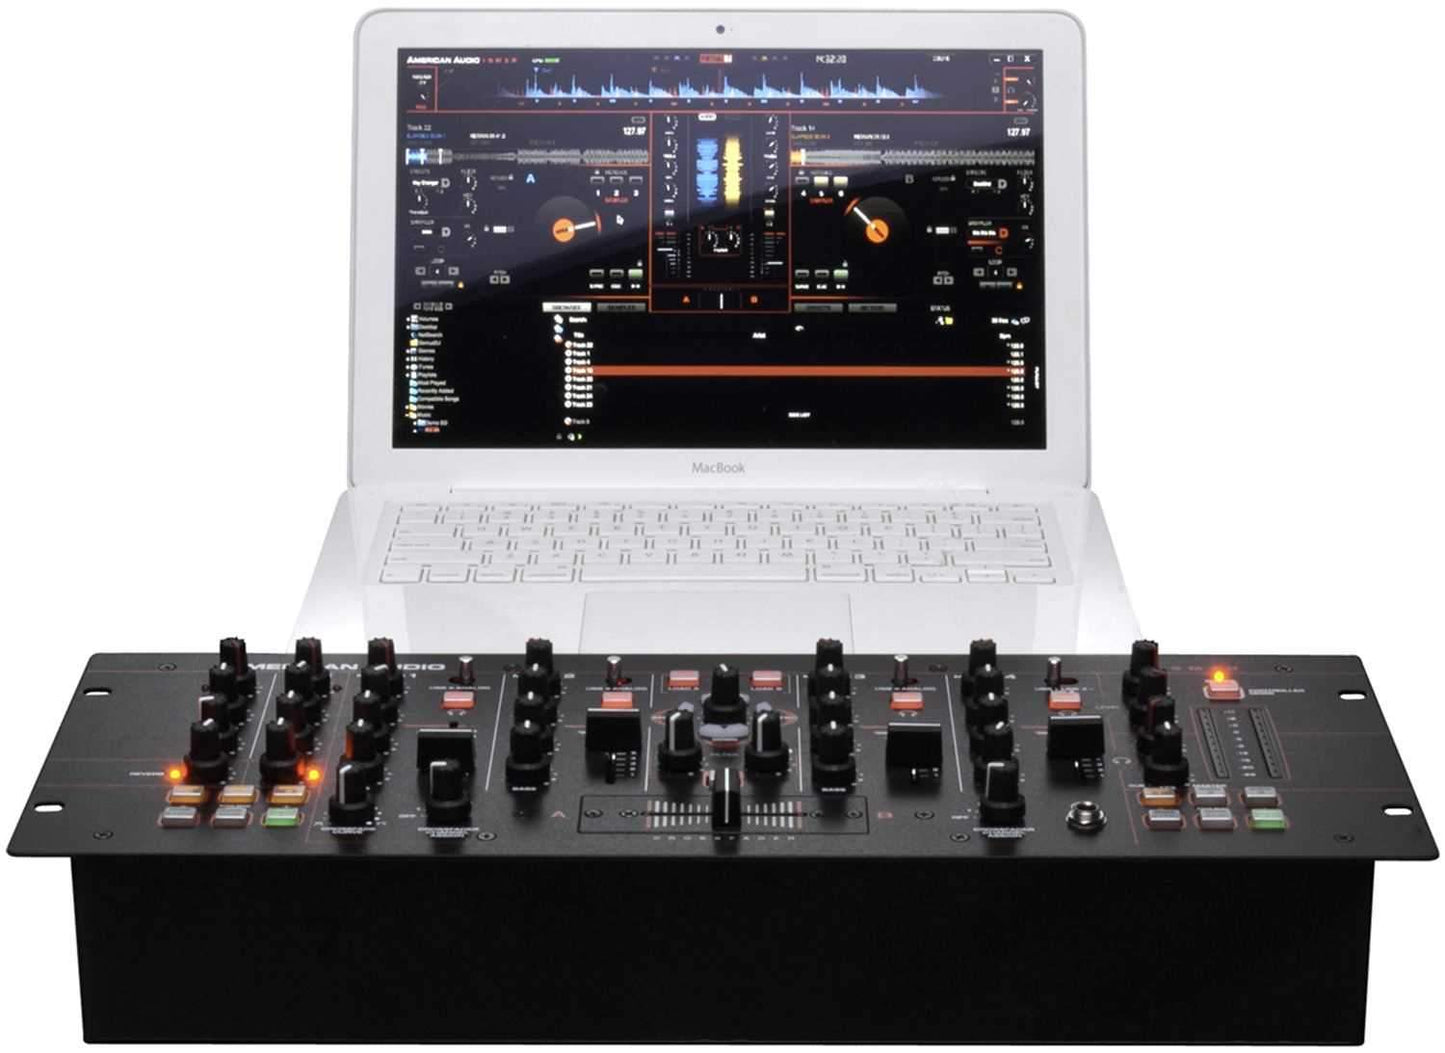 American Audio 19 MXR 4-Channel DJ Mixer & Controller - PSSL ProSound and Stage Lighting